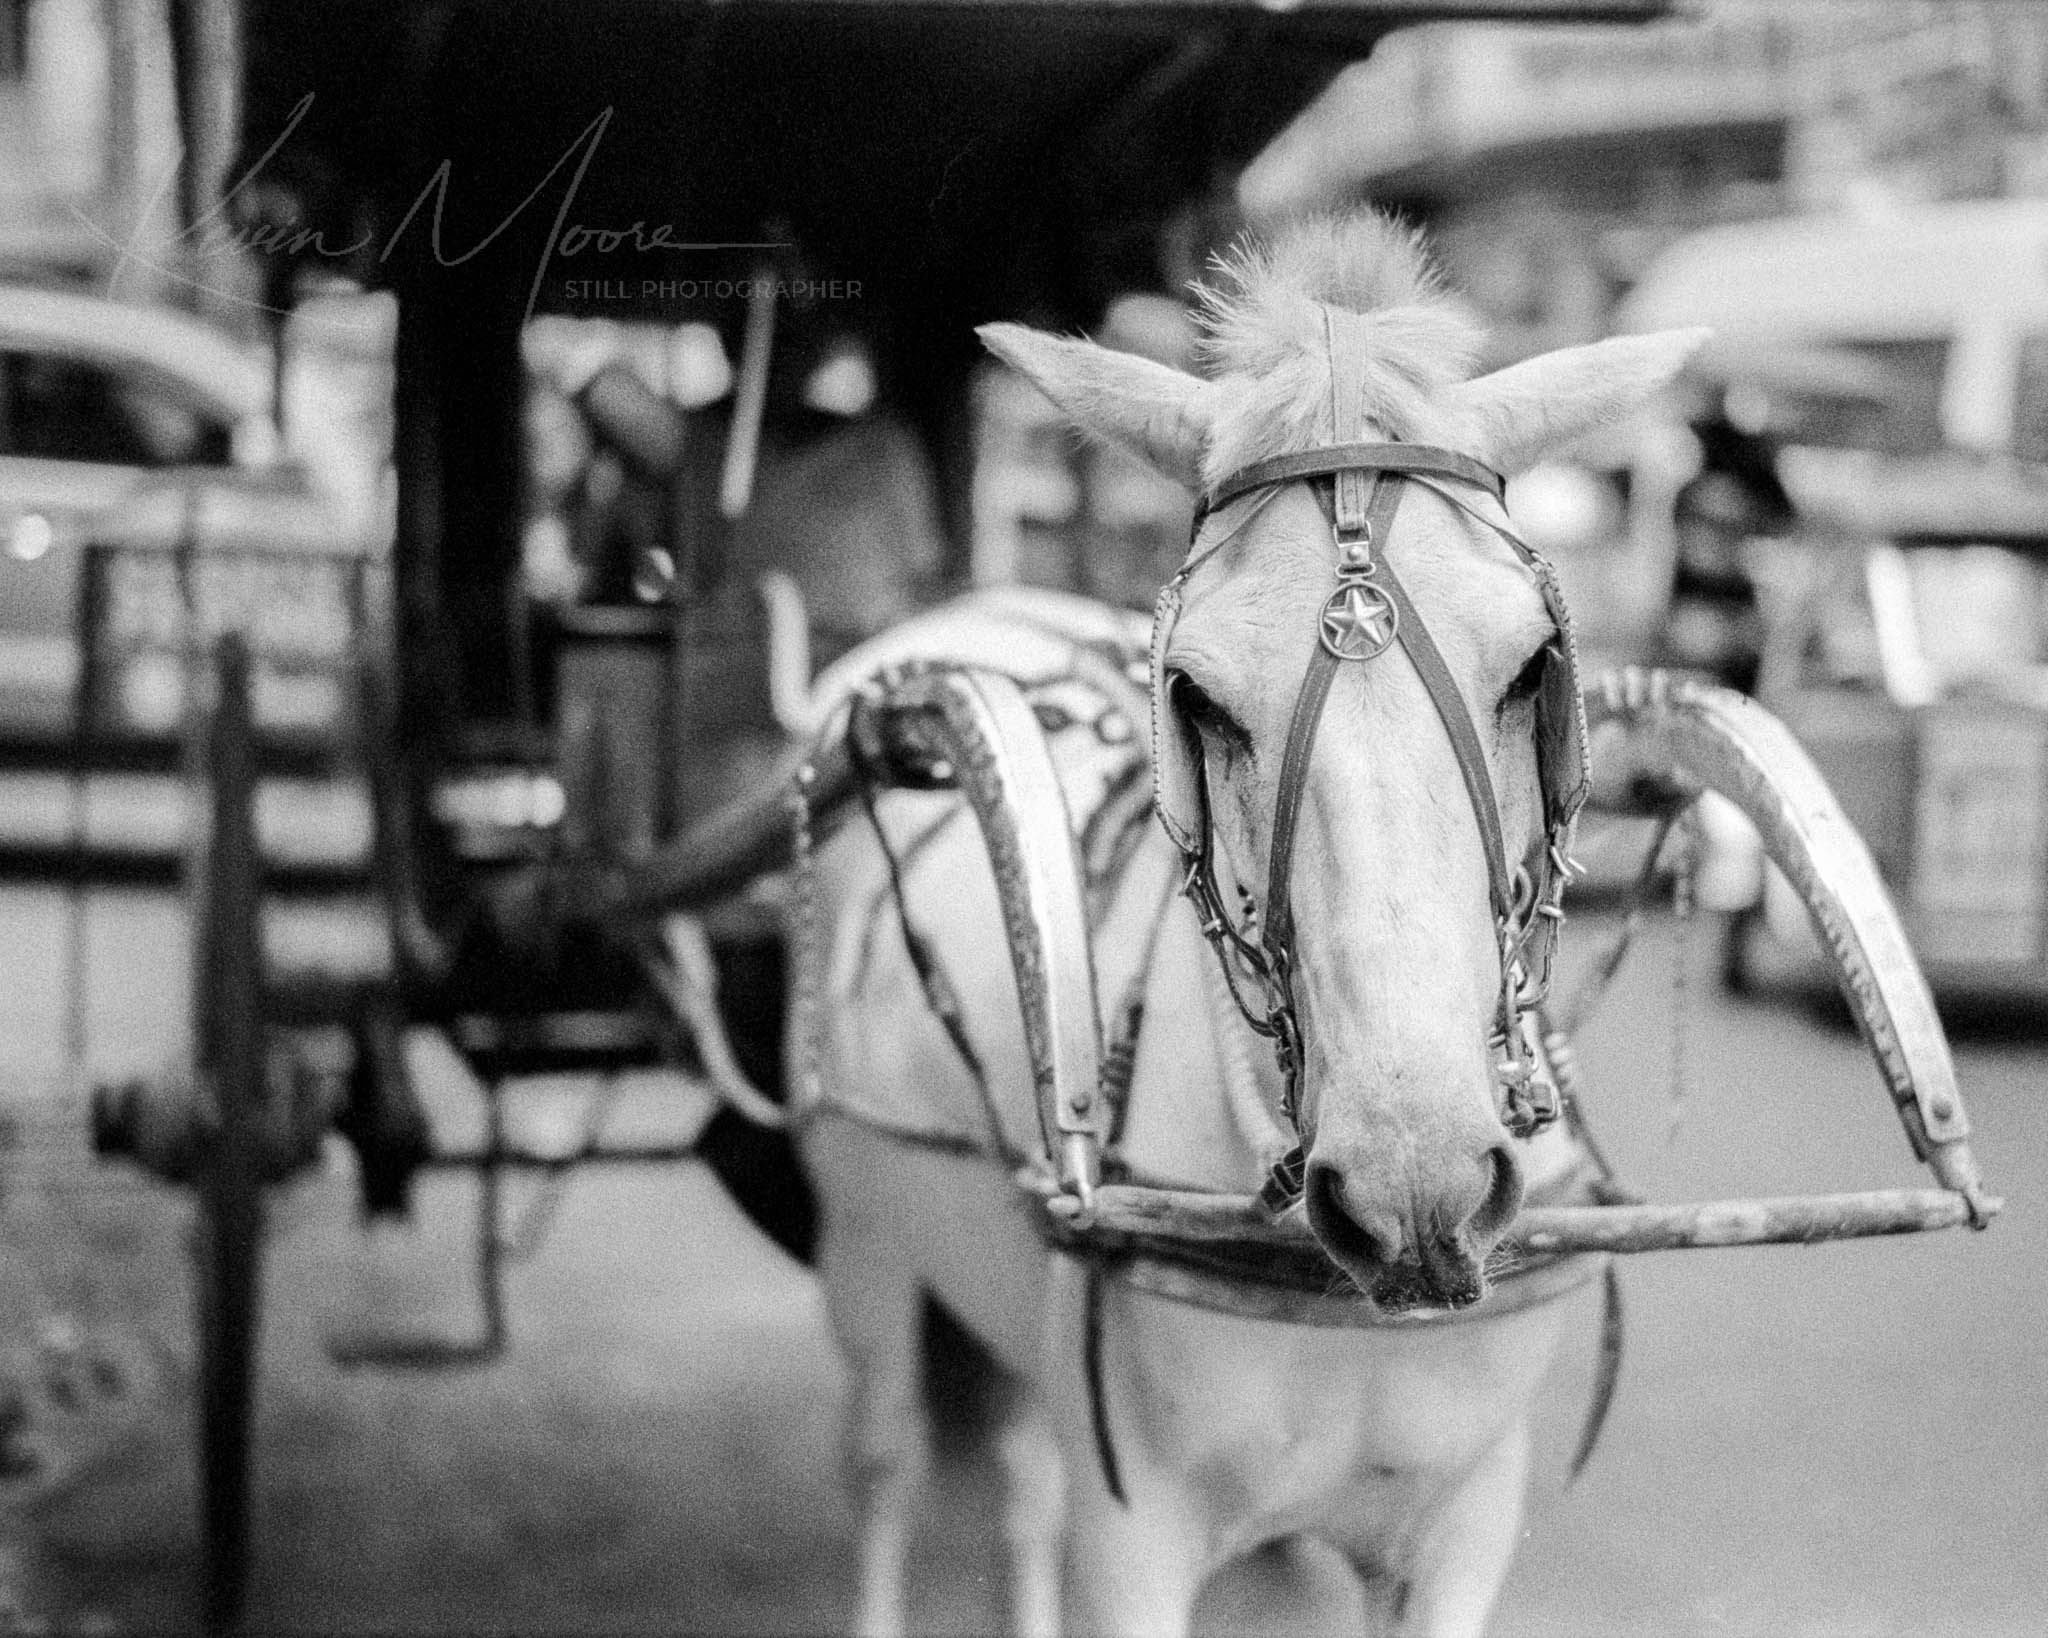 Monochrome image of attentive, well-groomed horse hitched to vintage carriage.